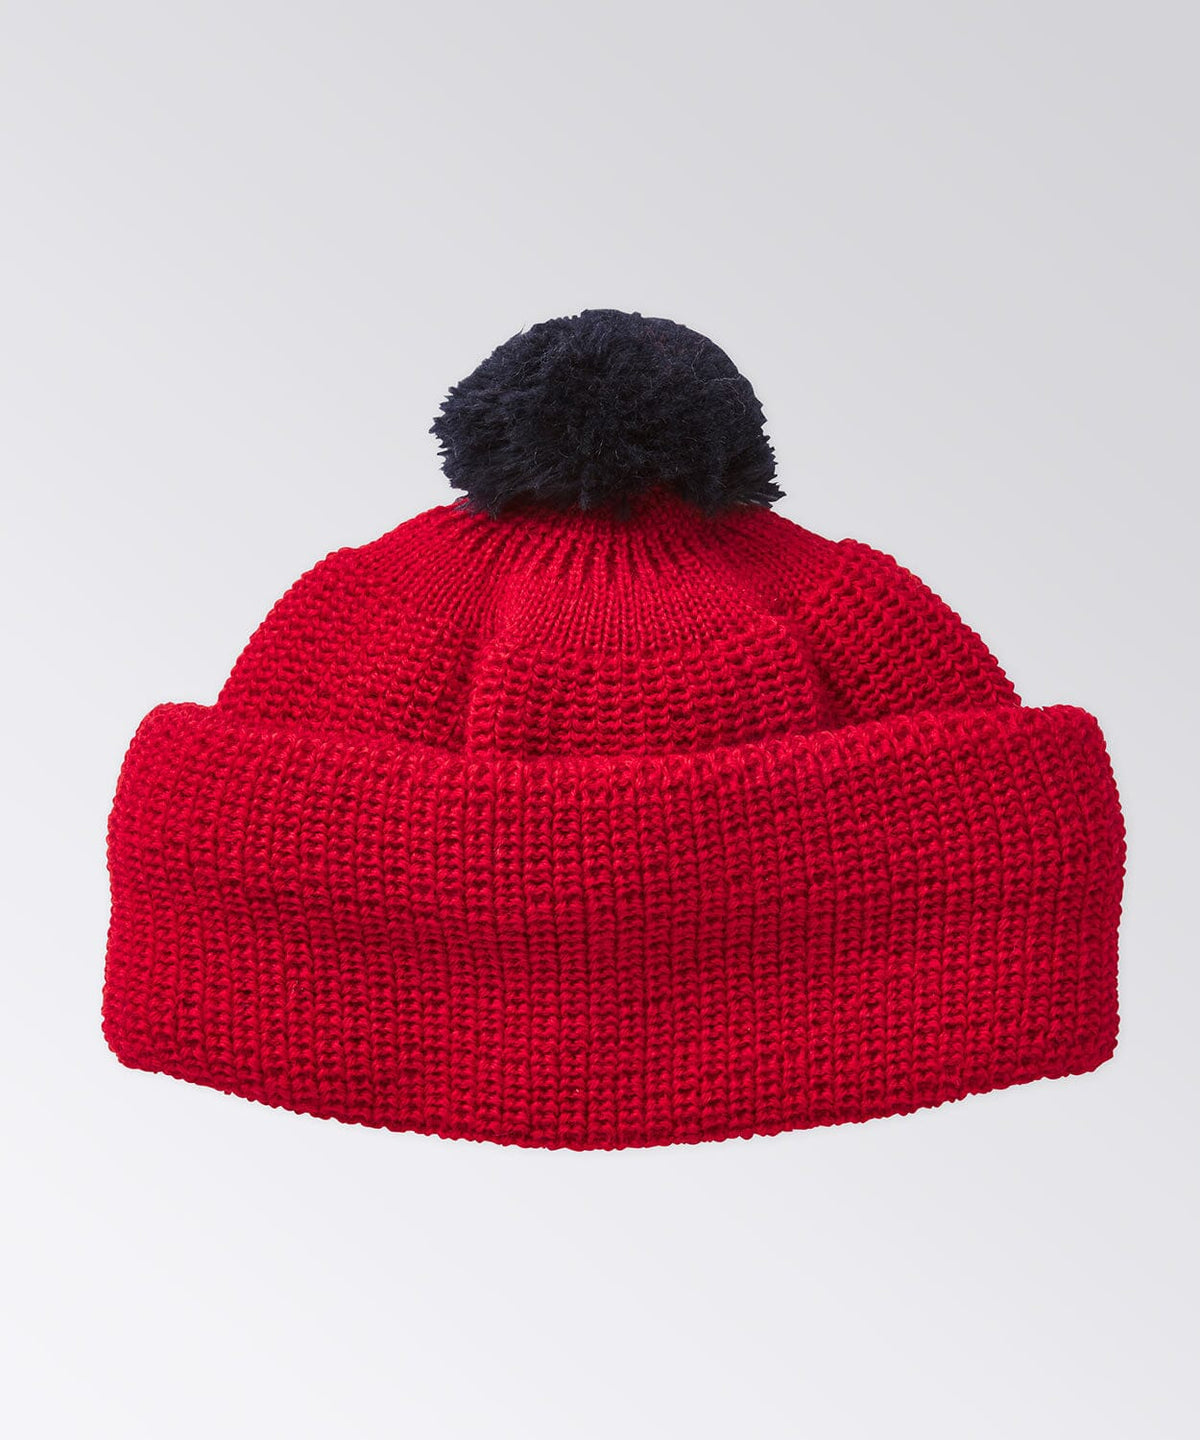 Wool beanie with contrast color pom pom on top